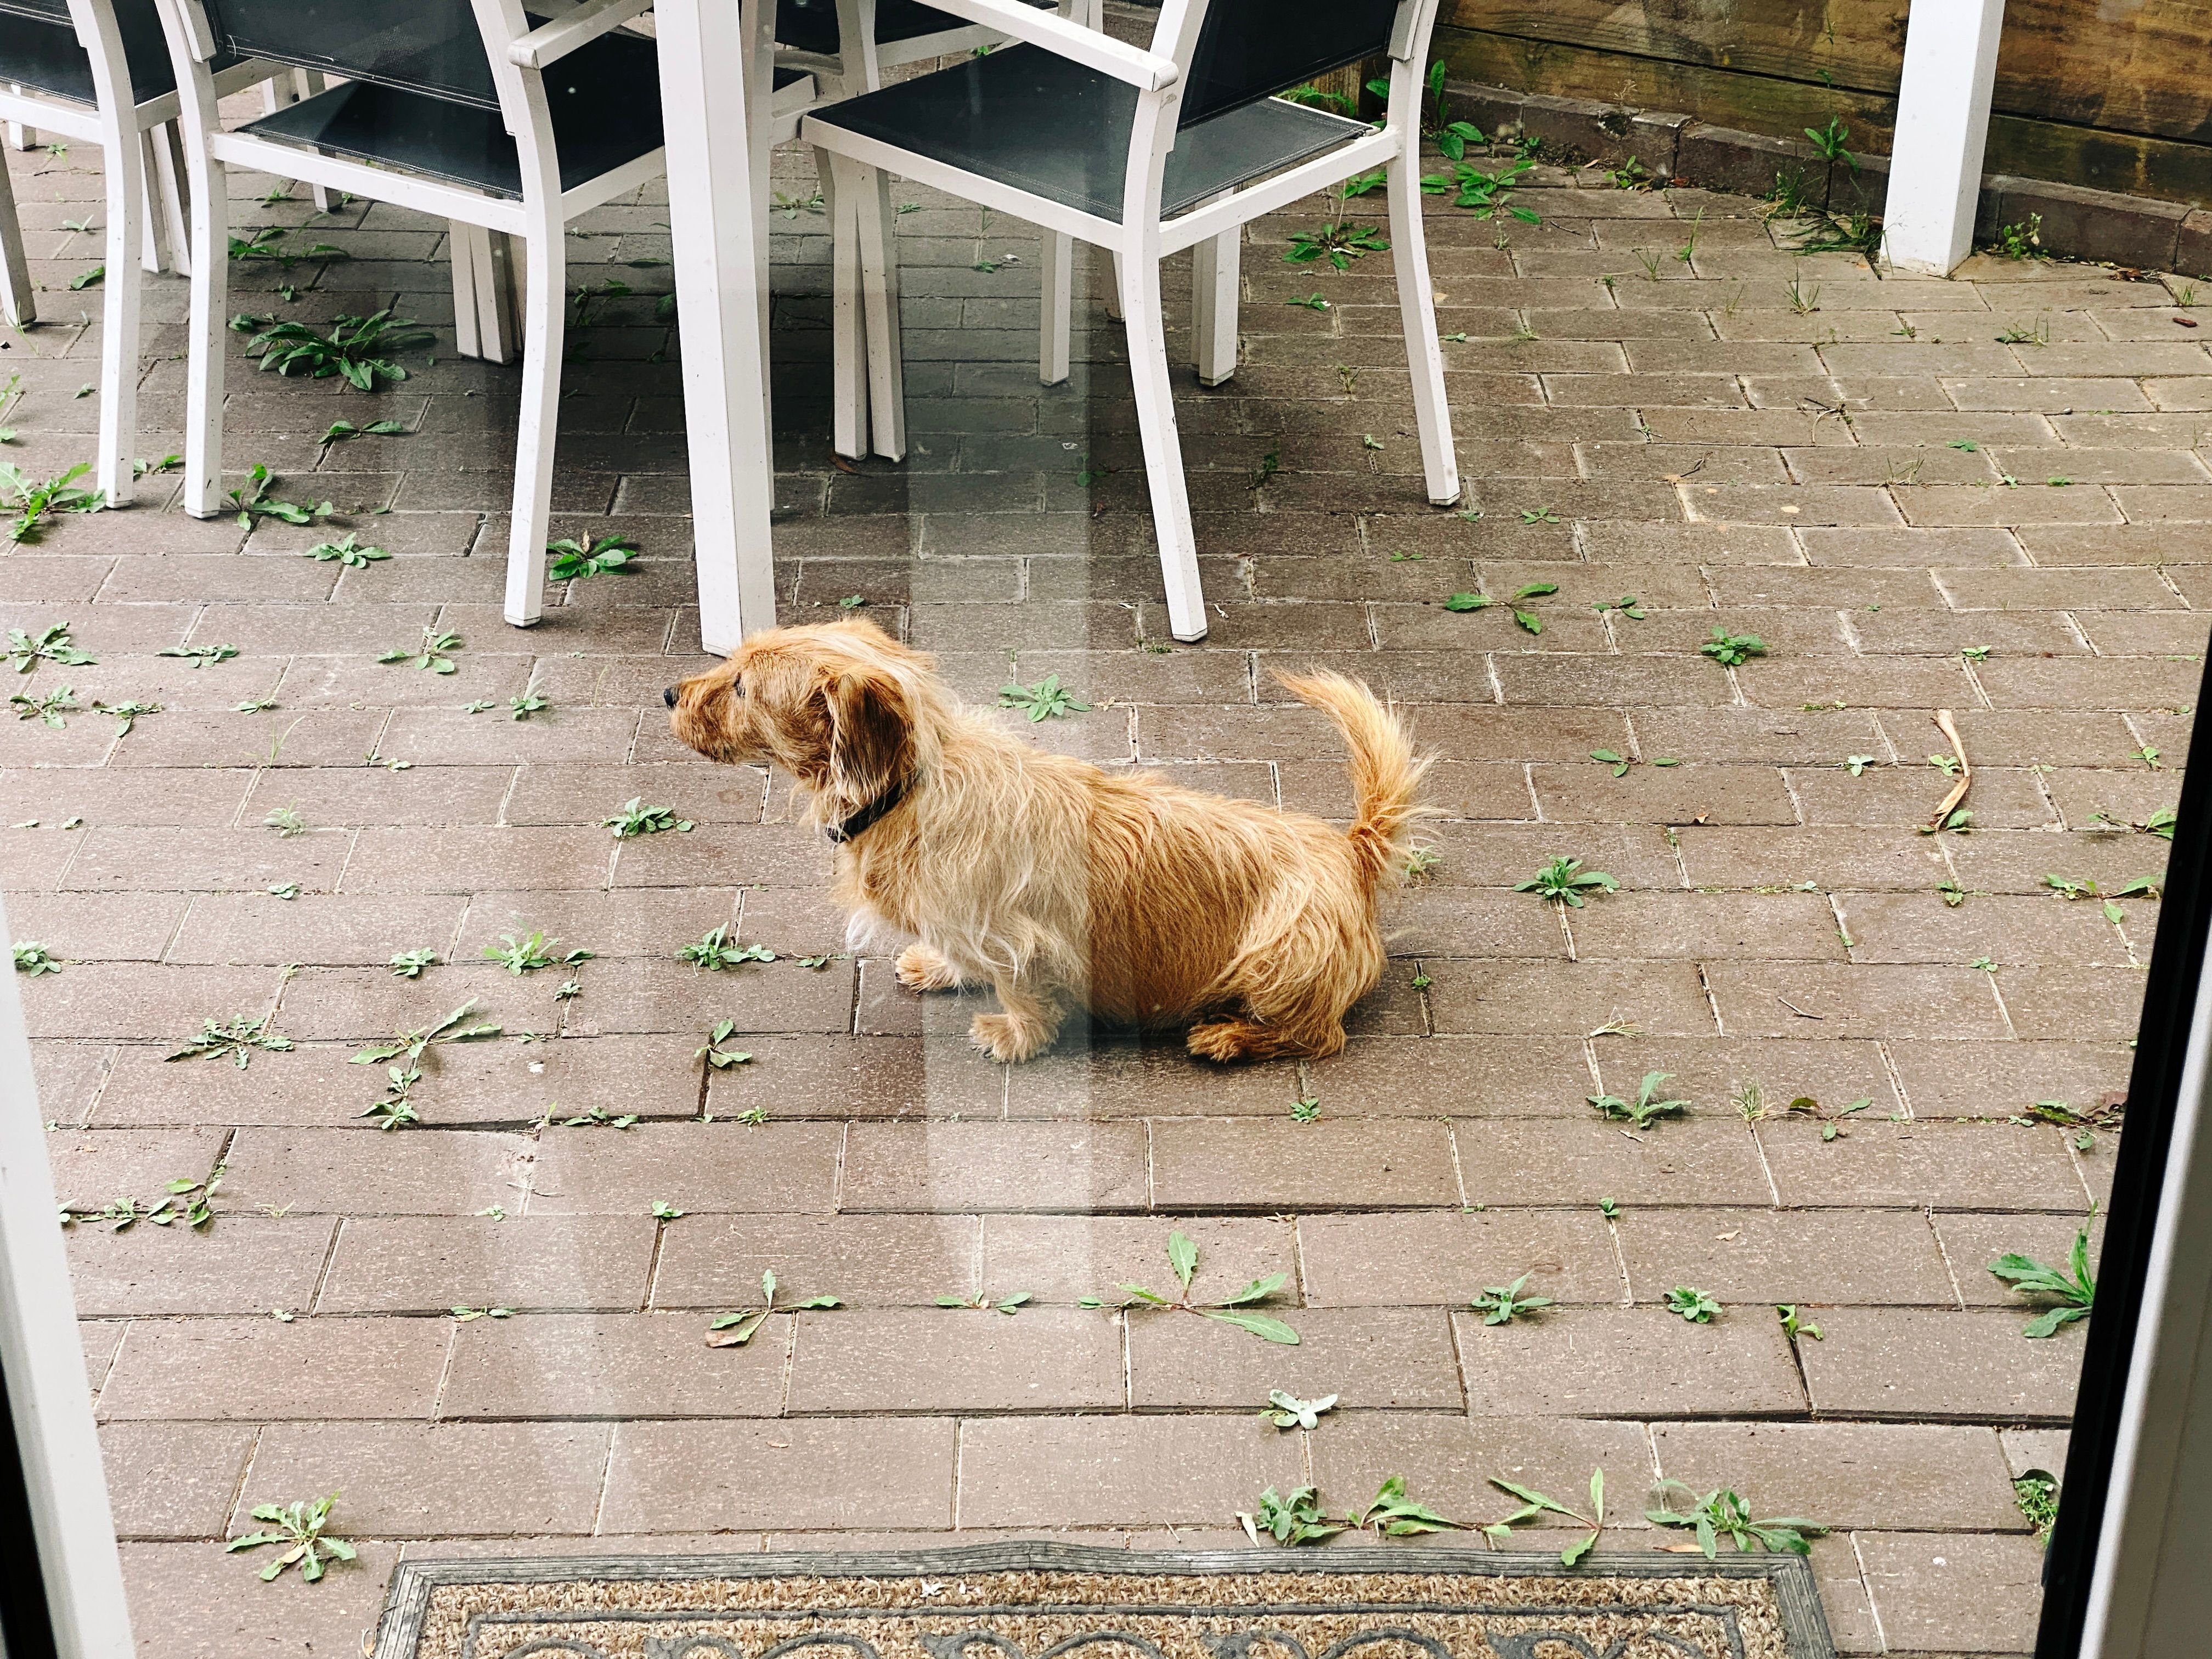 A photo taken through a glass door of a small scruffy blonde dog sitting outside on a patio, he's very intently watching the cat that's out of frame, his head is down lower than usual and his body language indicates he's clearly ready to leap up and start barking as soon as it becomes necessary.